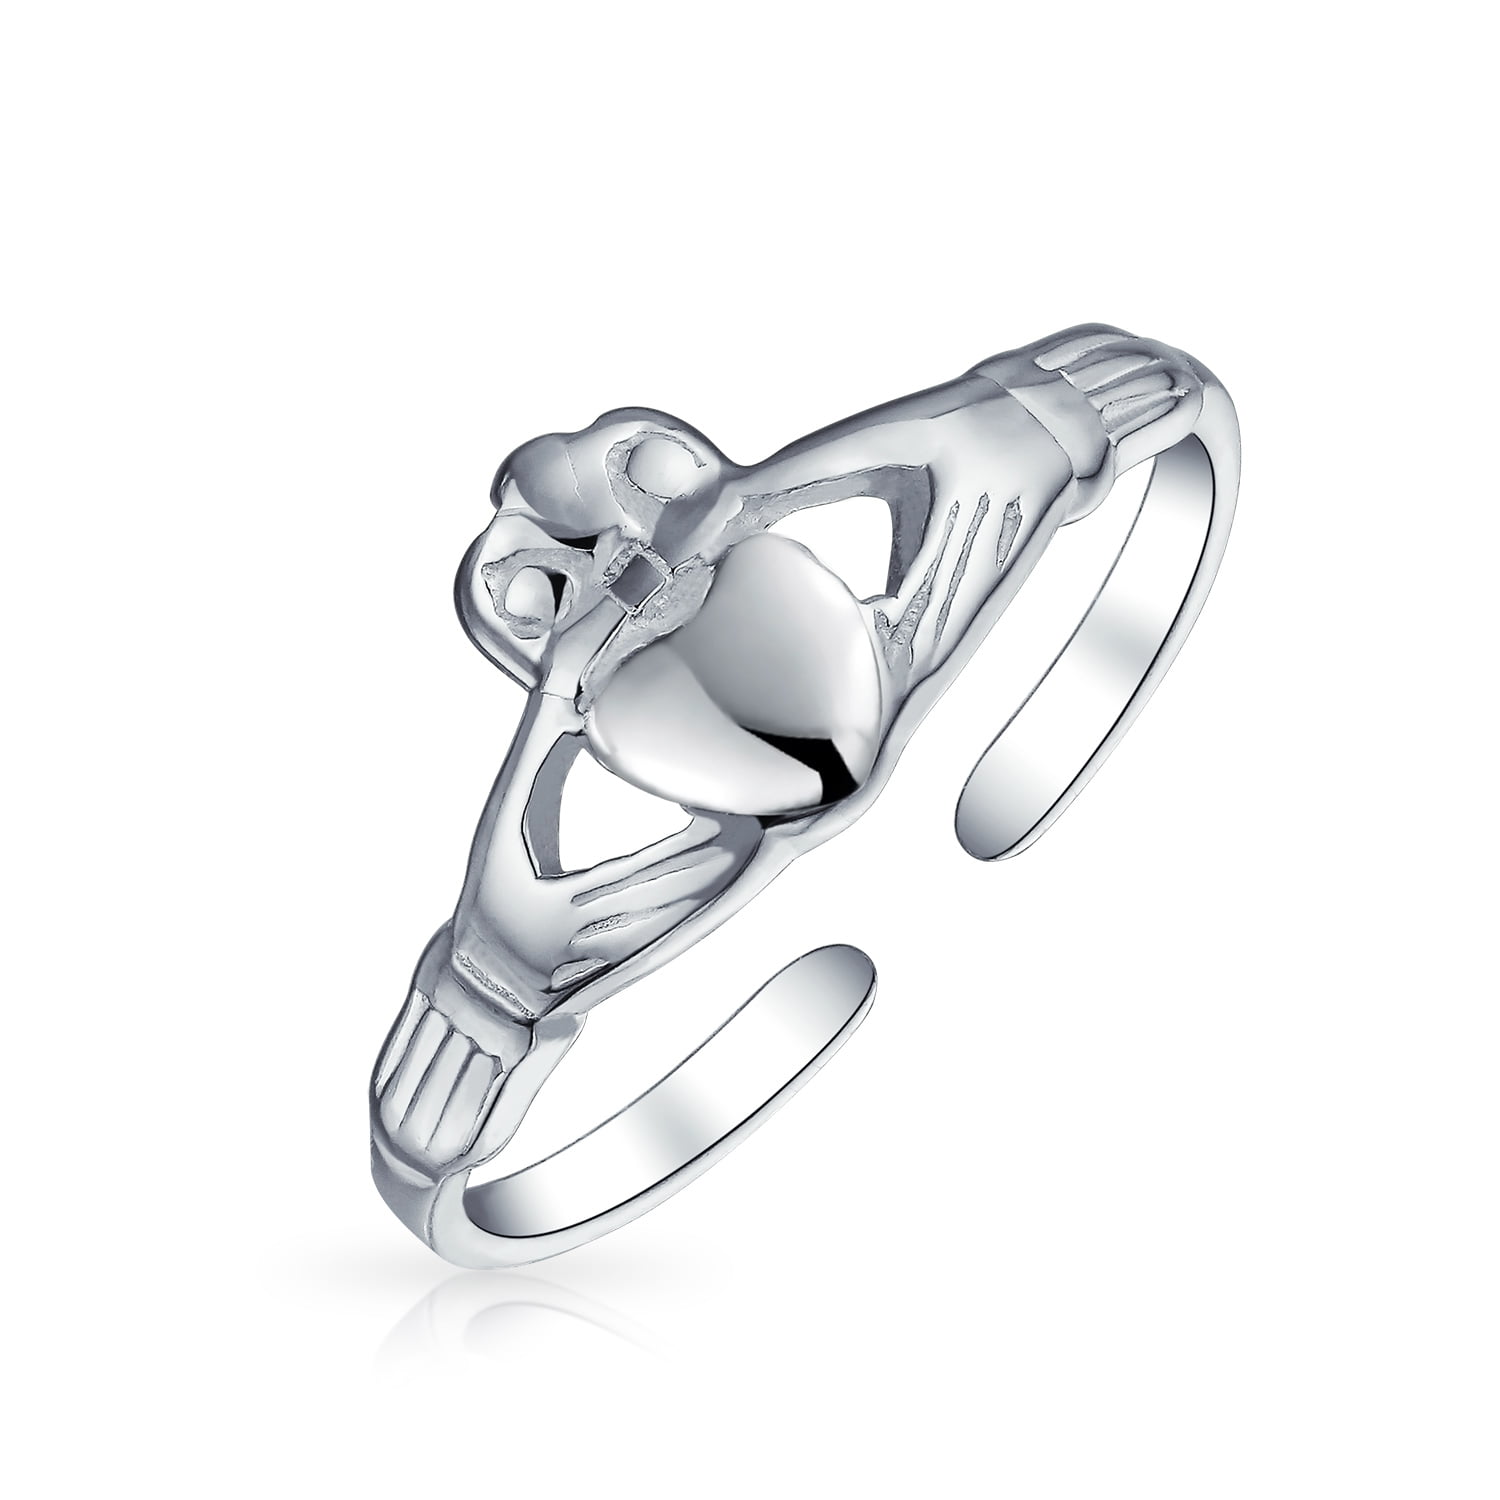 Size 4 Adjustable Sterling Silver Claddagh Toe Midi Ring 